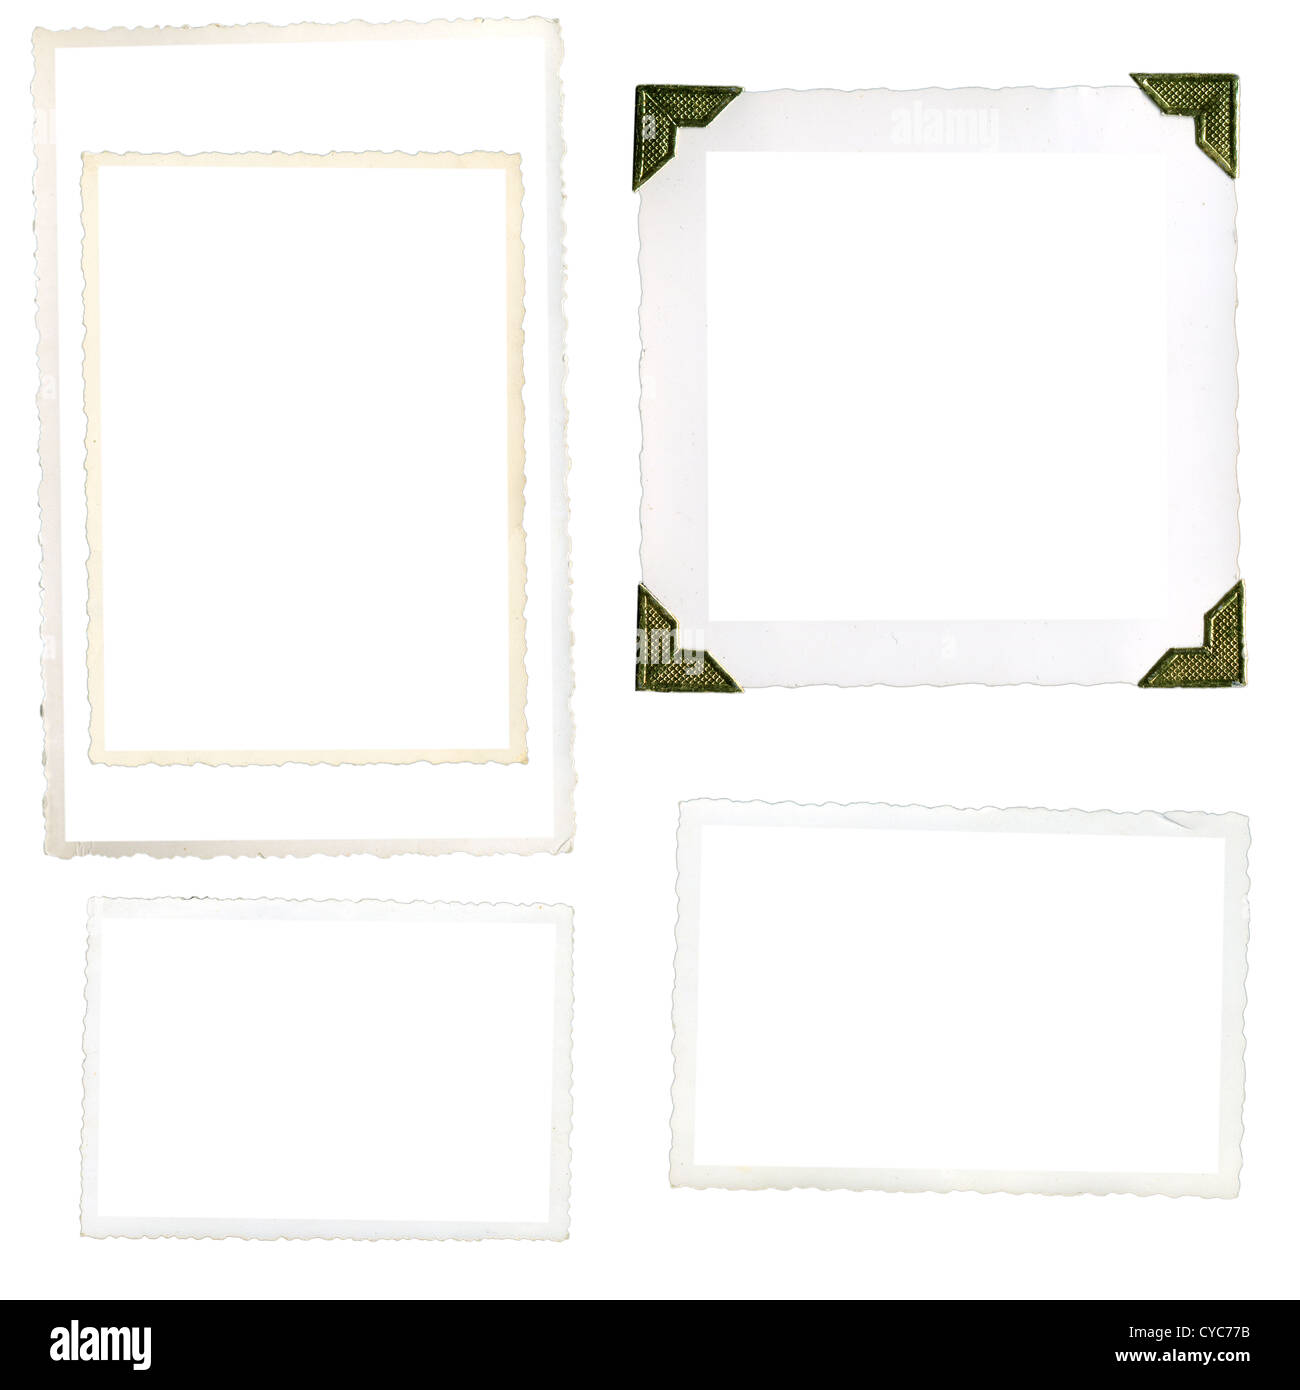 Vintage Photo Corners Isolated On White Background For Scrapbook